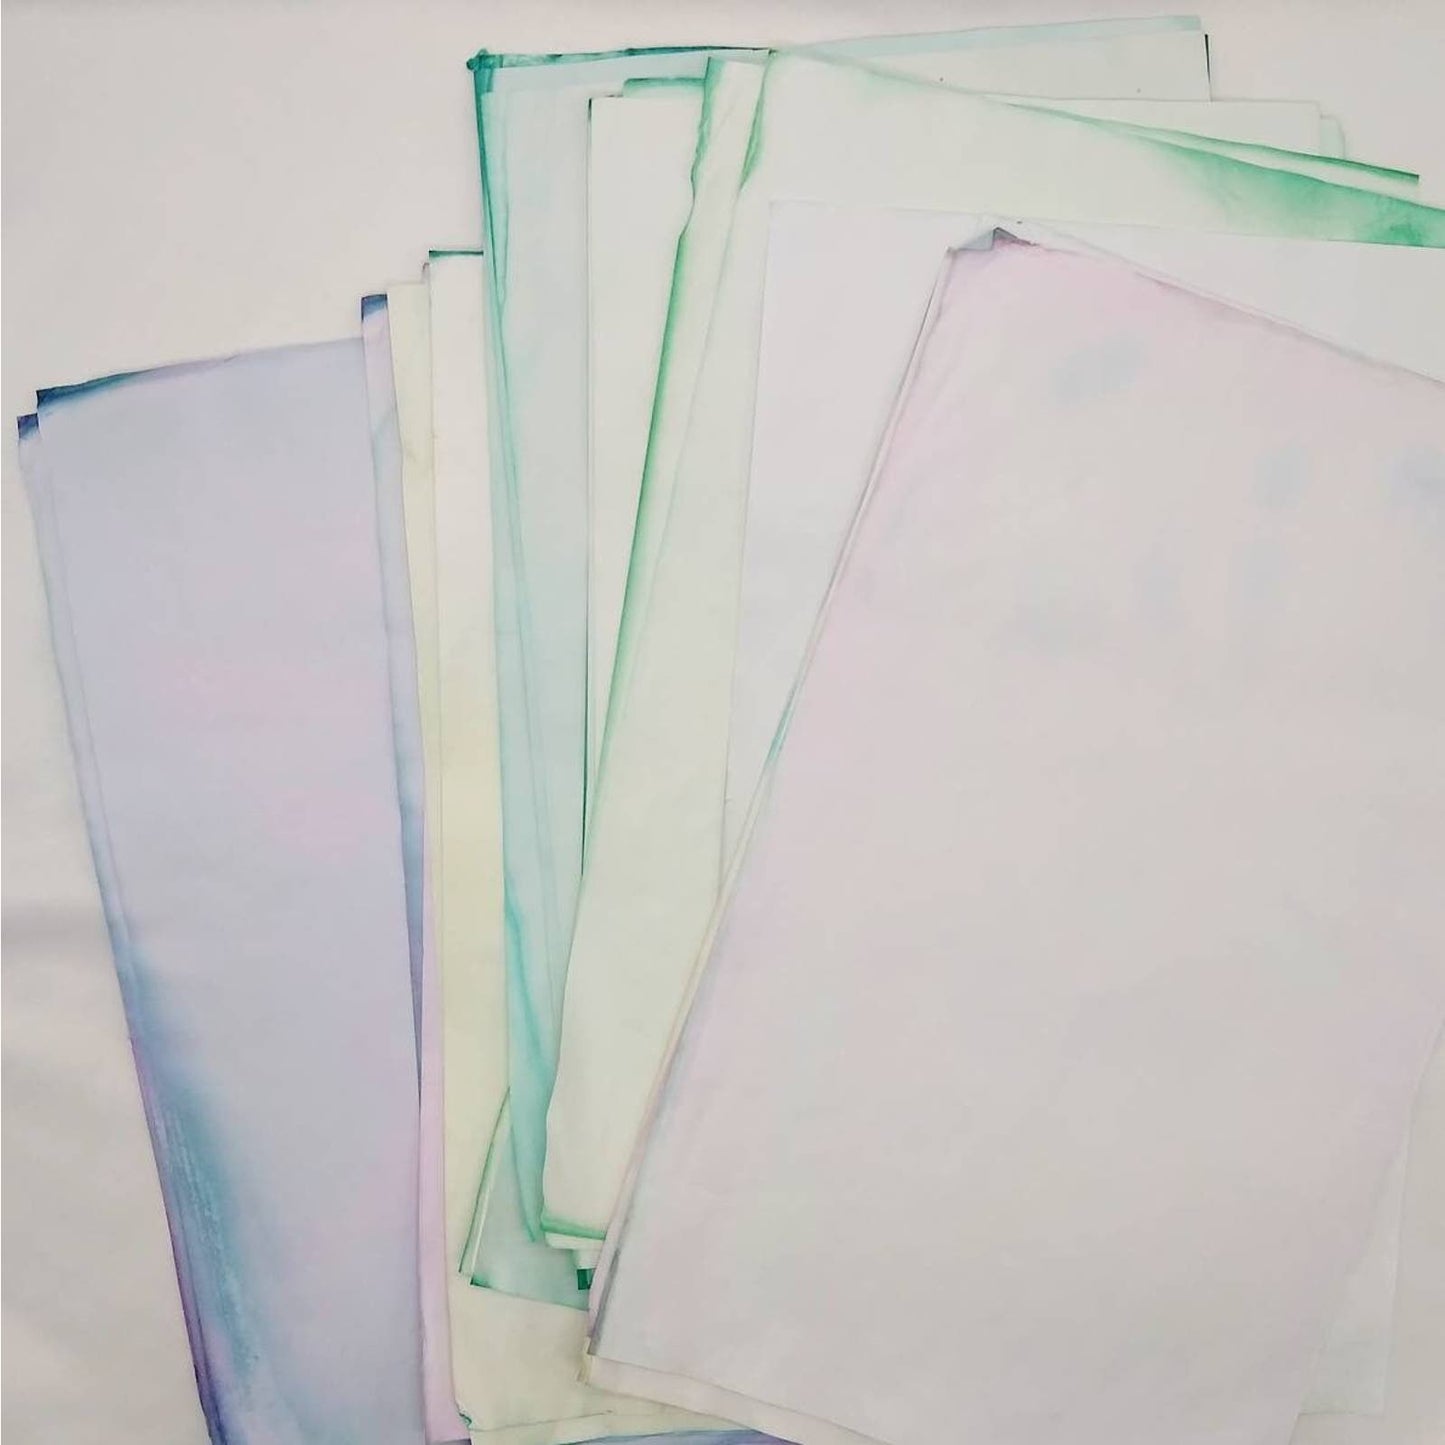 25 Pastel Dyed 8.5"x14" Papers, Purple and Turquoise Papers, Hand Dyed Papers